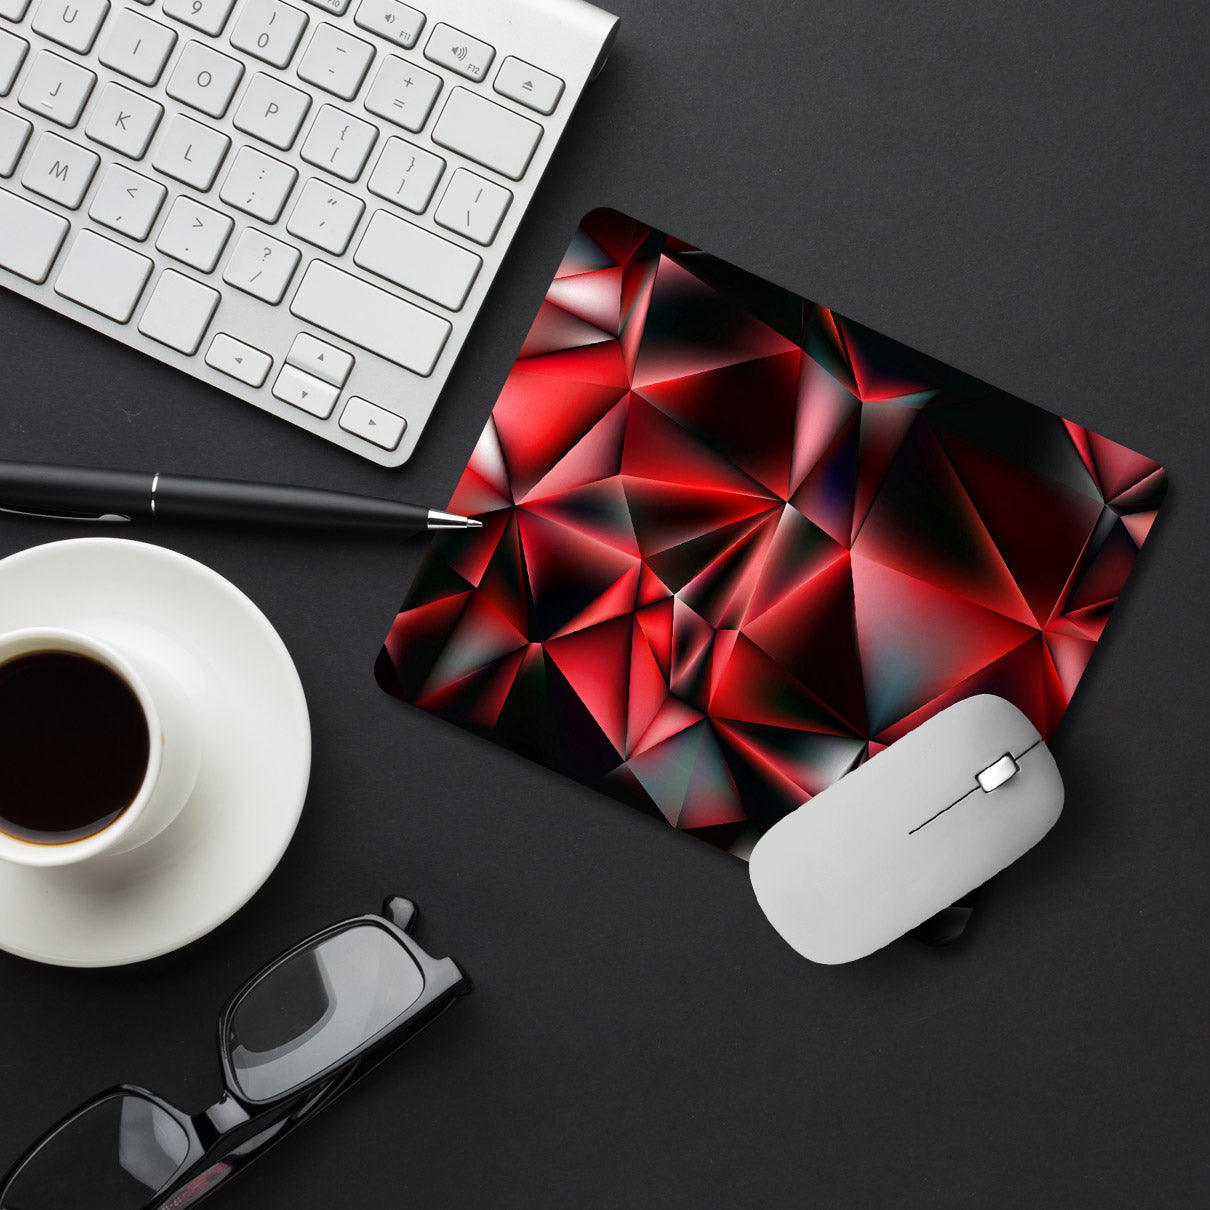 Red Polygon Pattern Designer Printed Premium Mouse pad (9 in x 7.5 in)